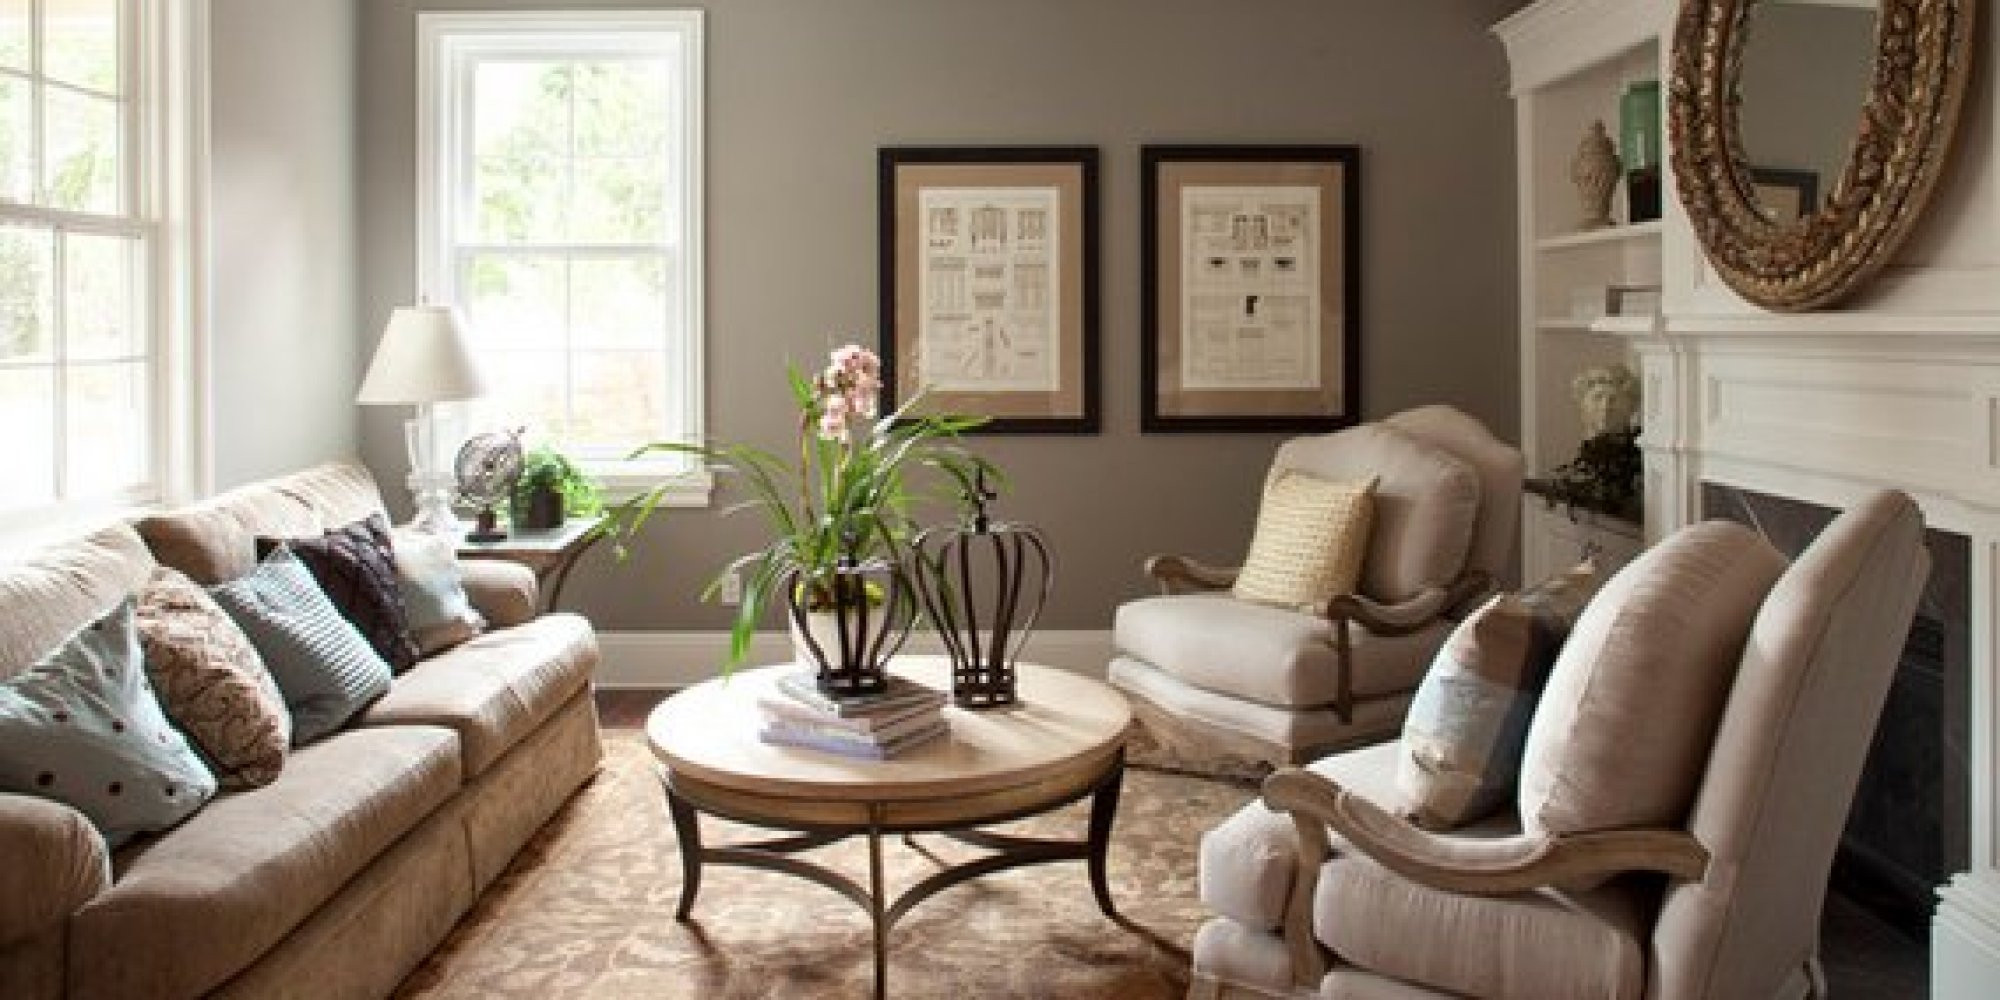 Best Colors For Living Room
 The 6 Best Paint Colors That Work In Any Home